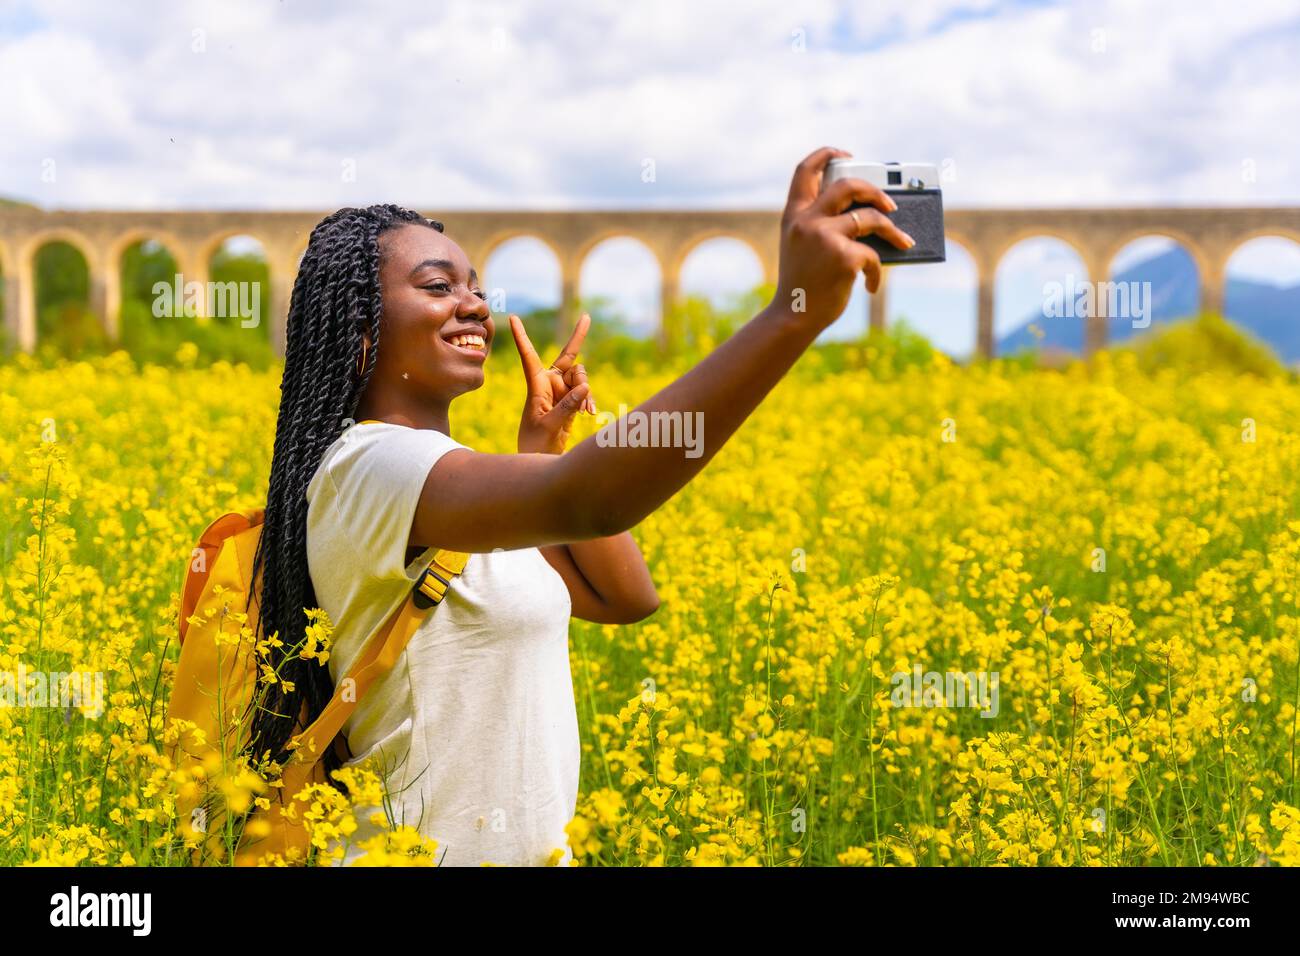 Selfie in nature with a vintage camera, a girl of black ethnicity with braids, a traveler, in a field of yellow flowers Stock Photo